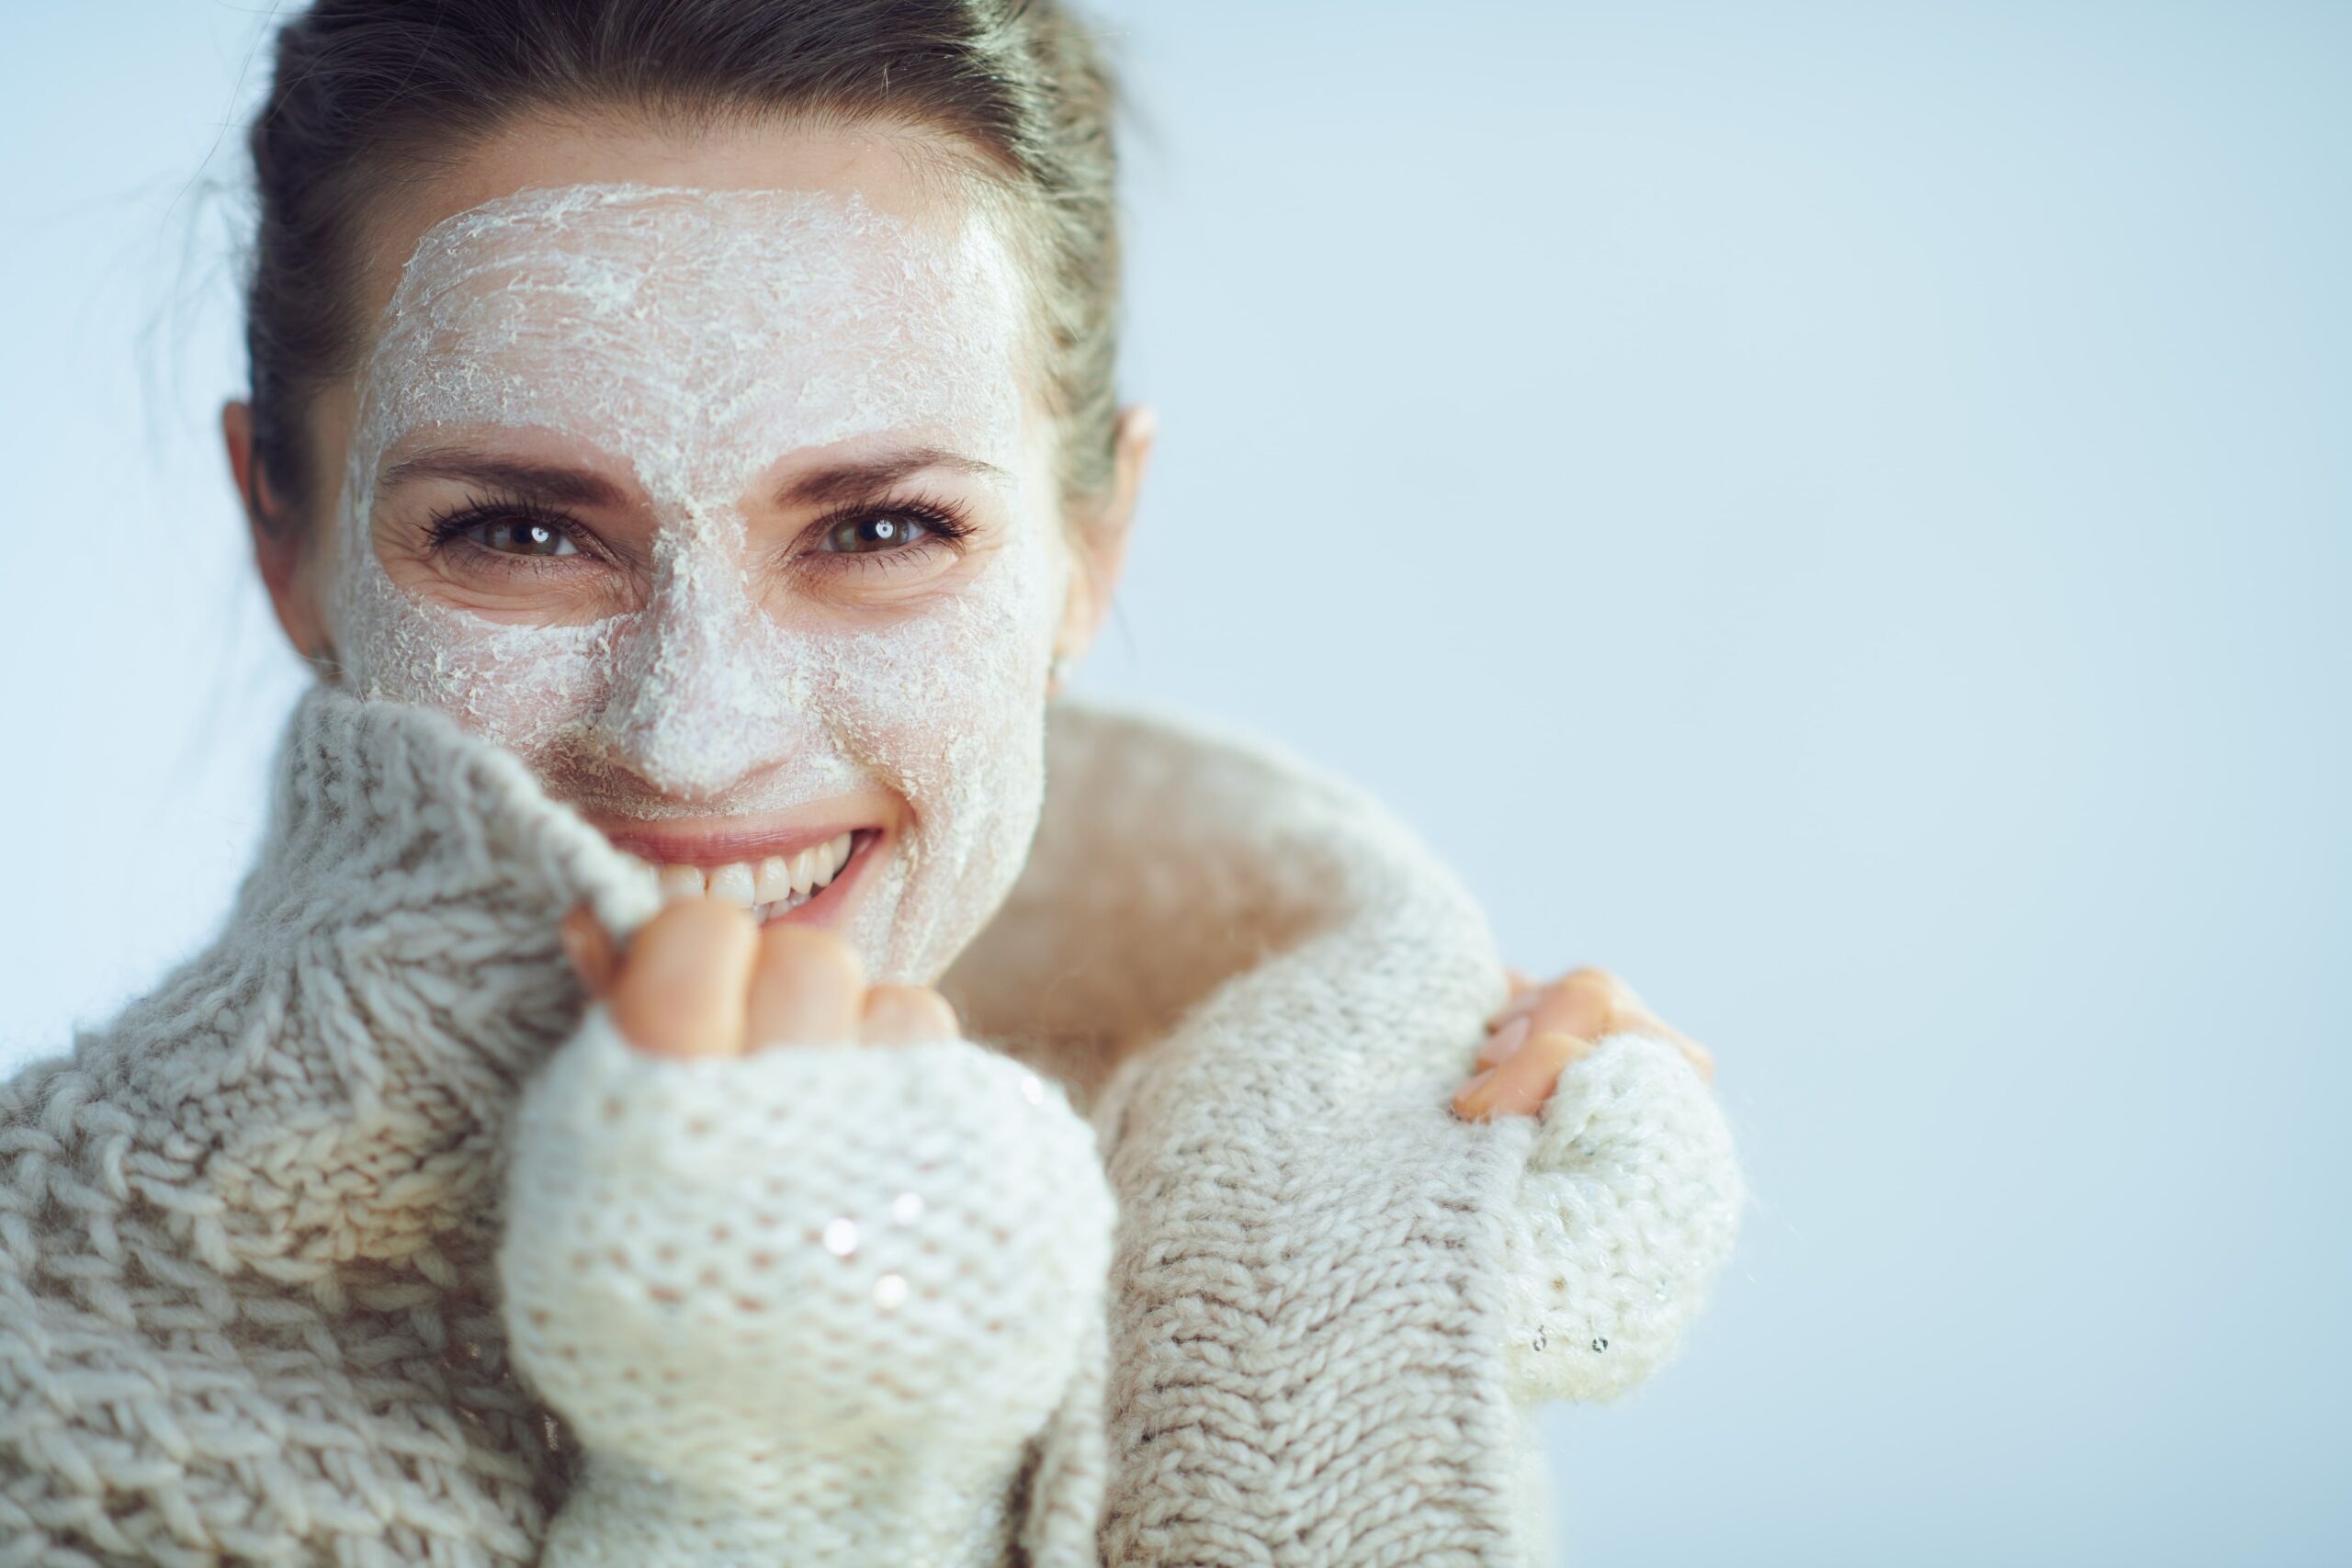 Trending Skin Treatments this Winter